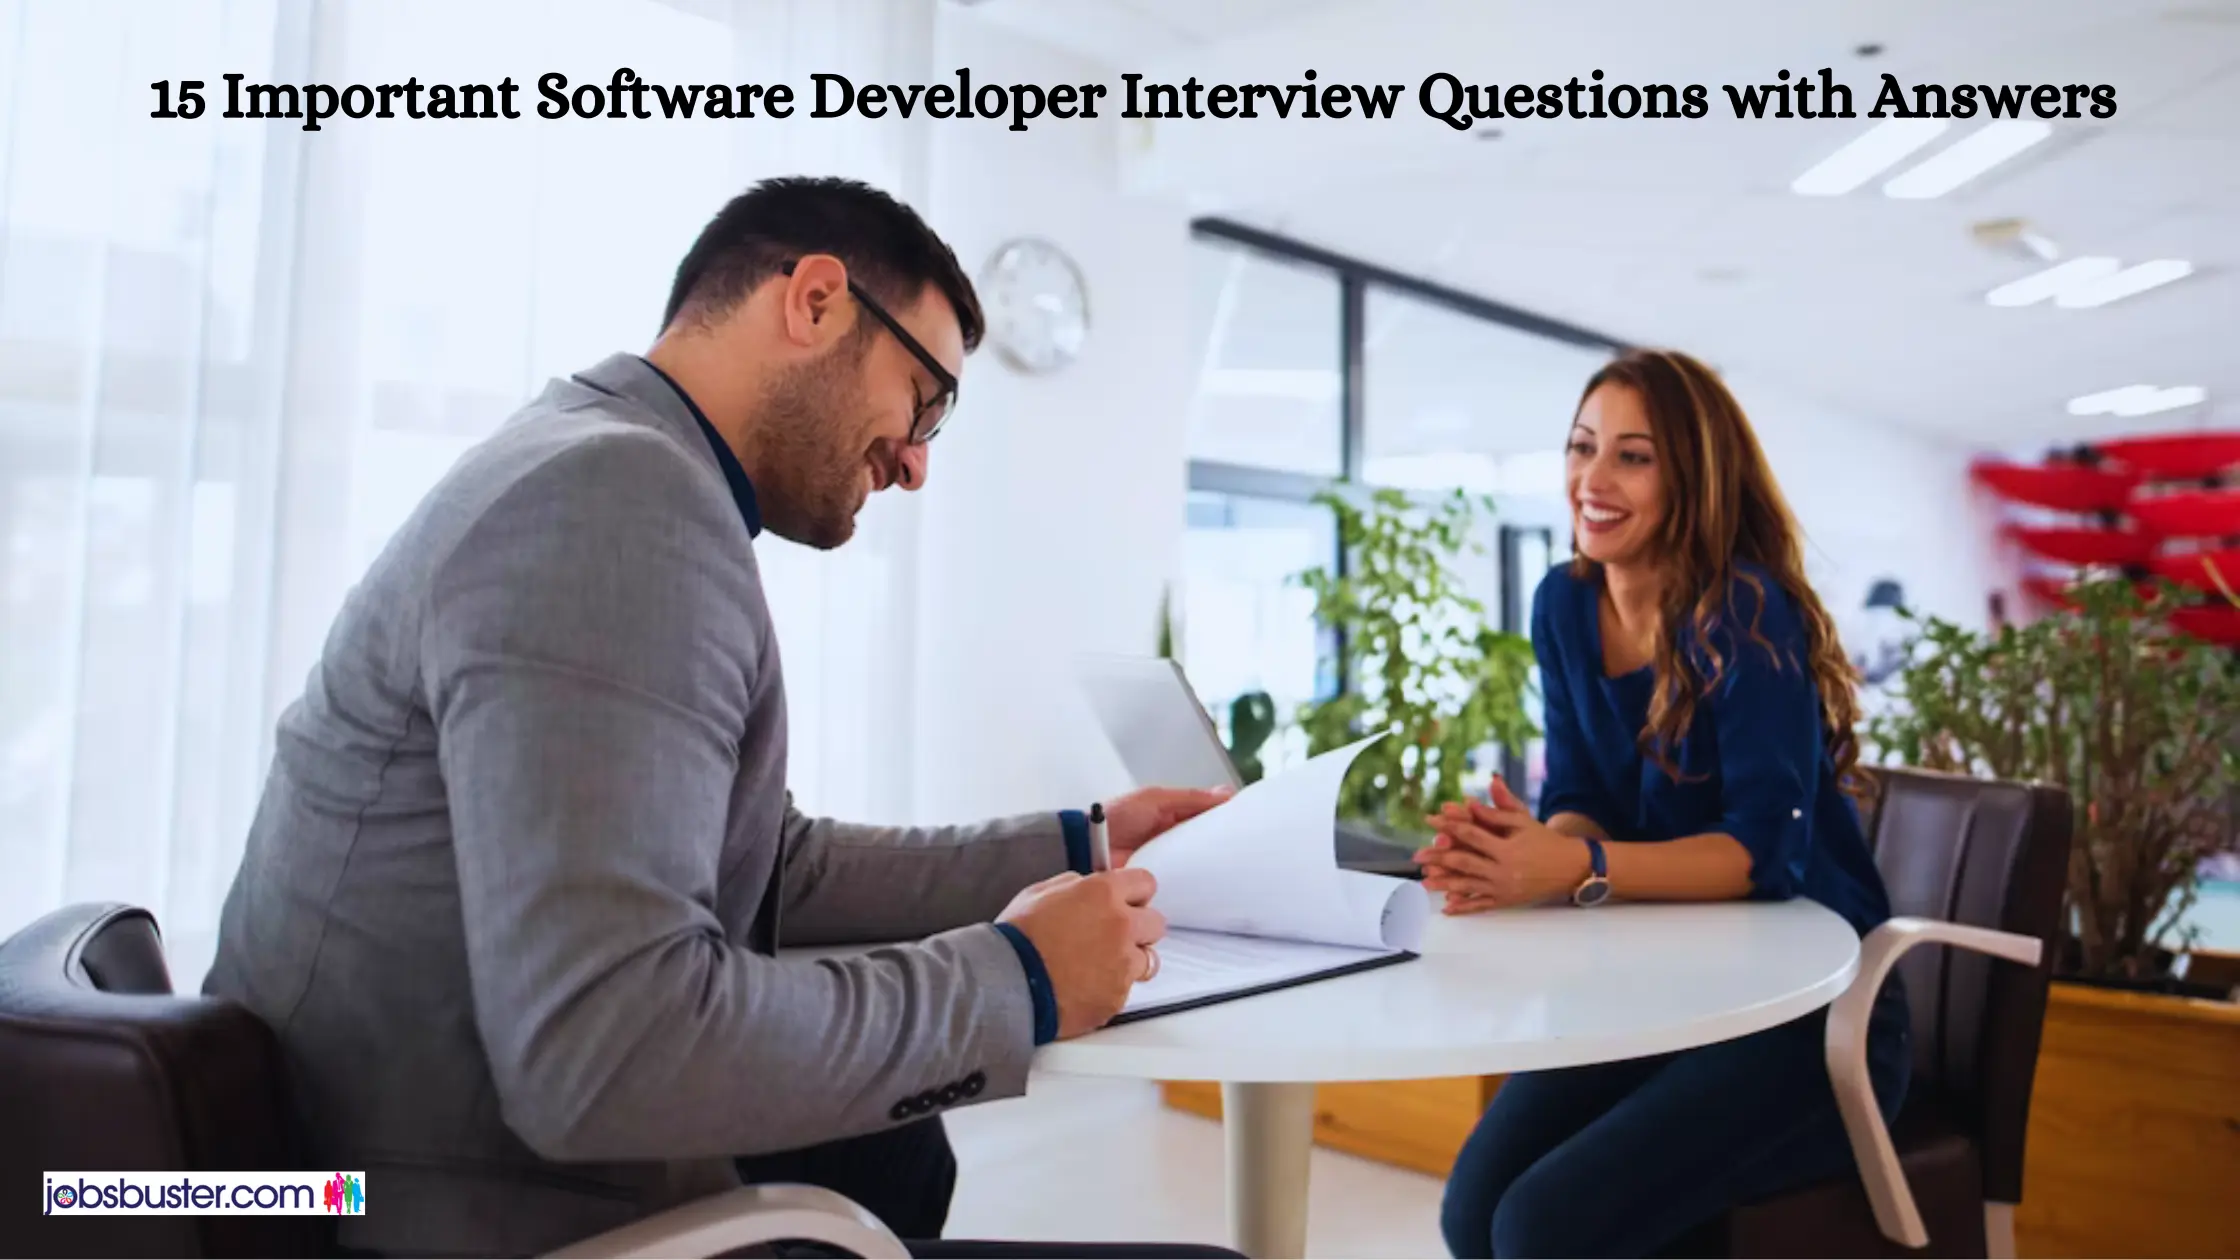 15 Important Software Developer Interview Questions with Answers